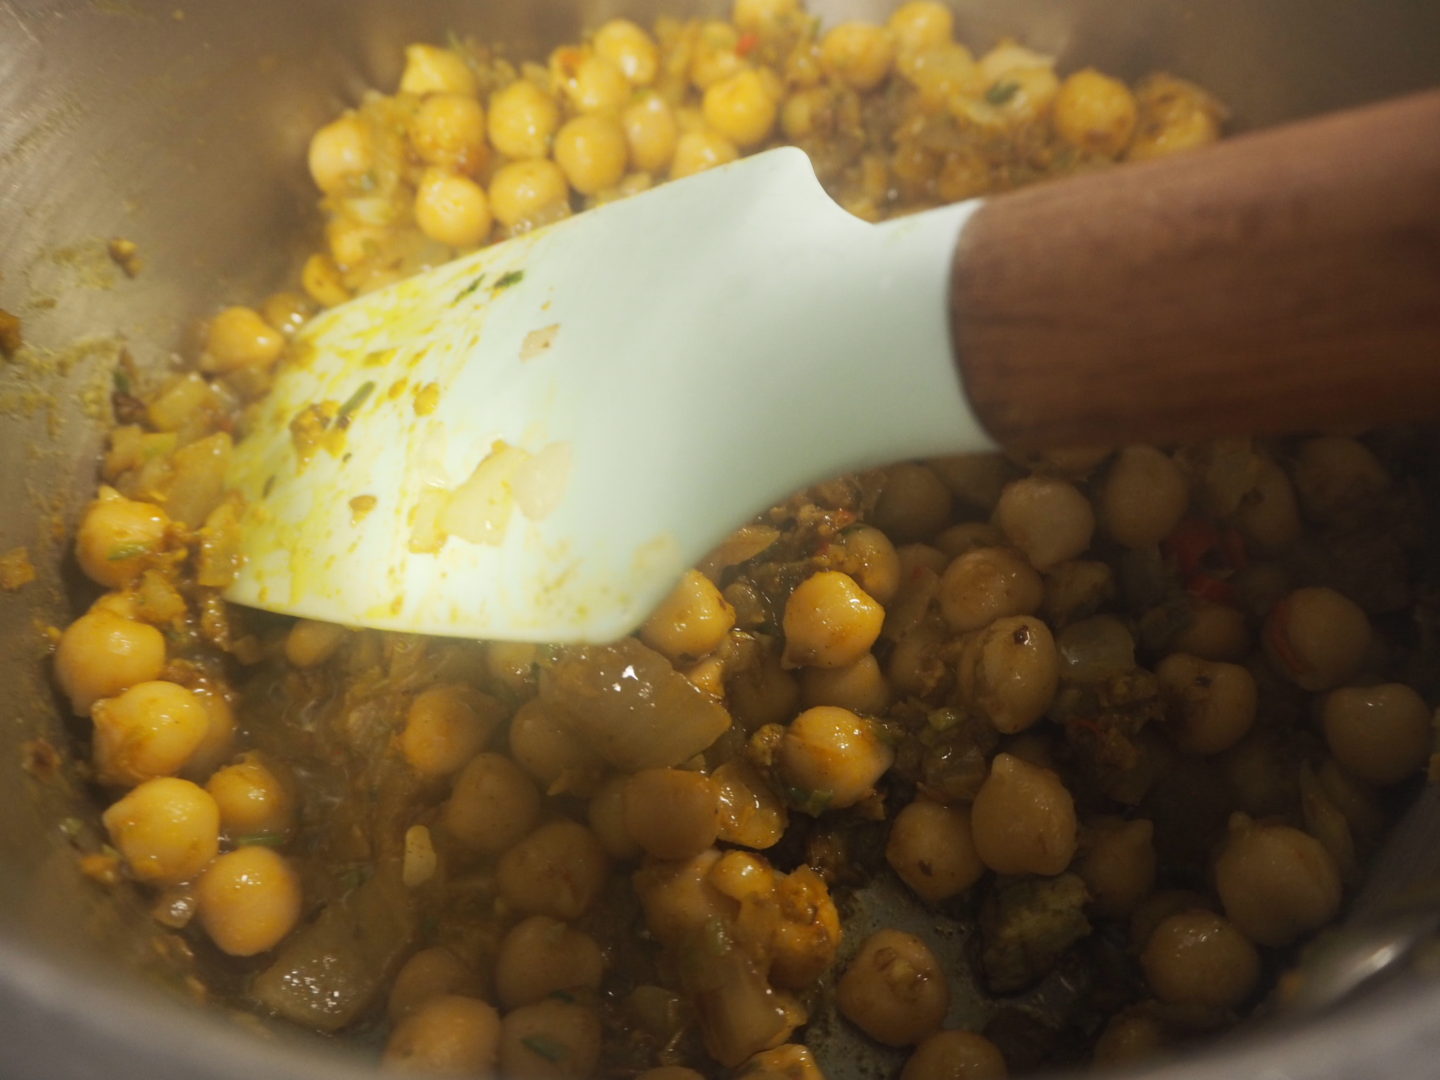 Cooking chickpeas